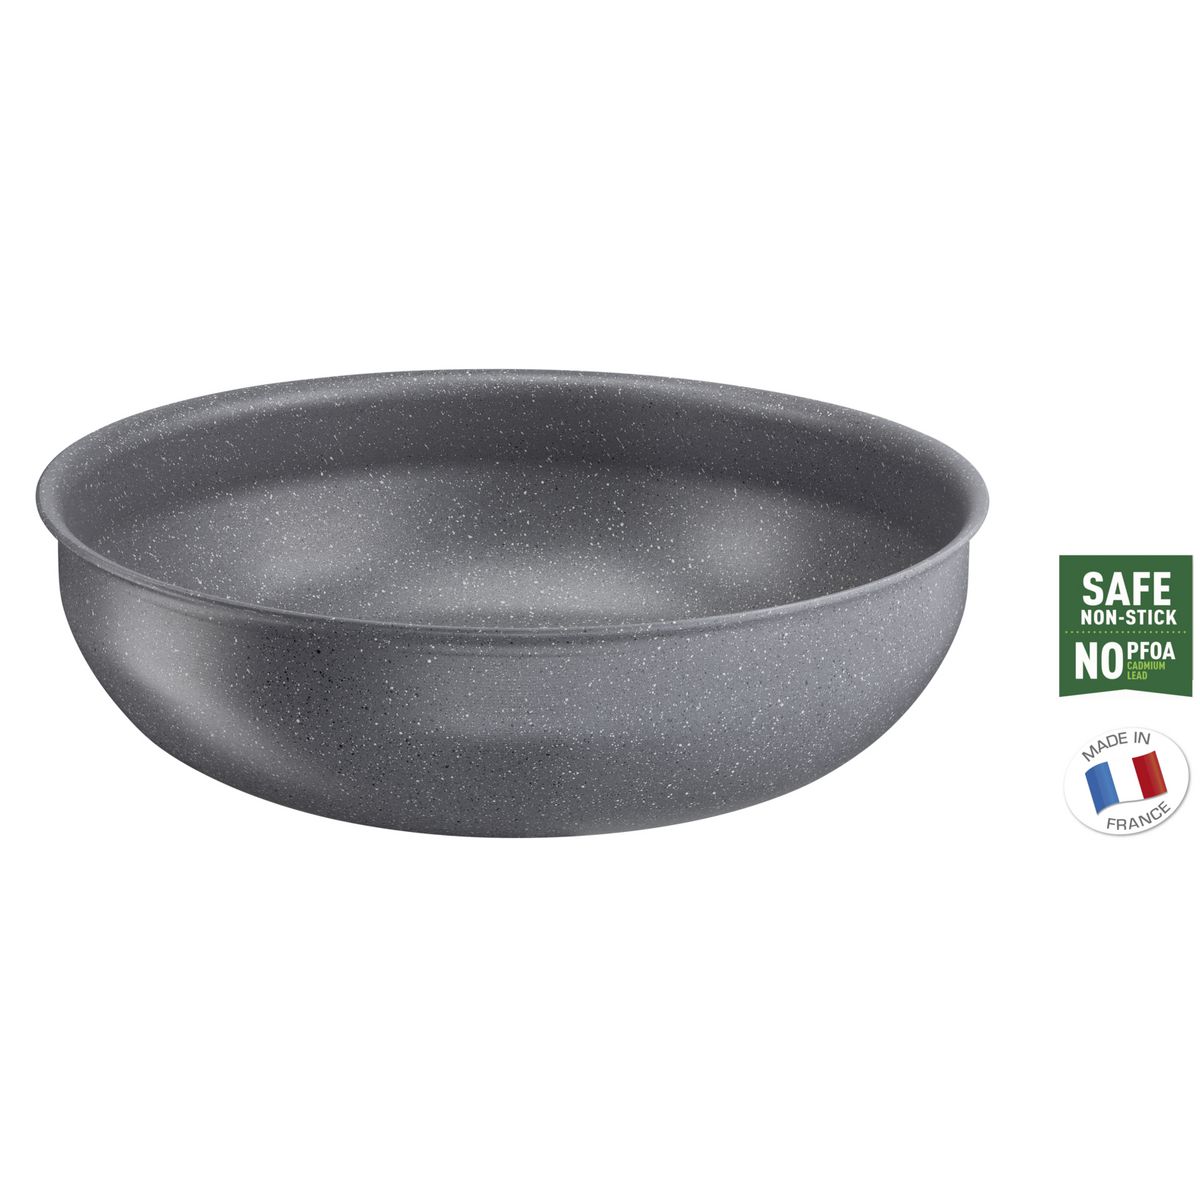 TEFAL Wok induction INGENIO recy cook 26 cm pas cher 